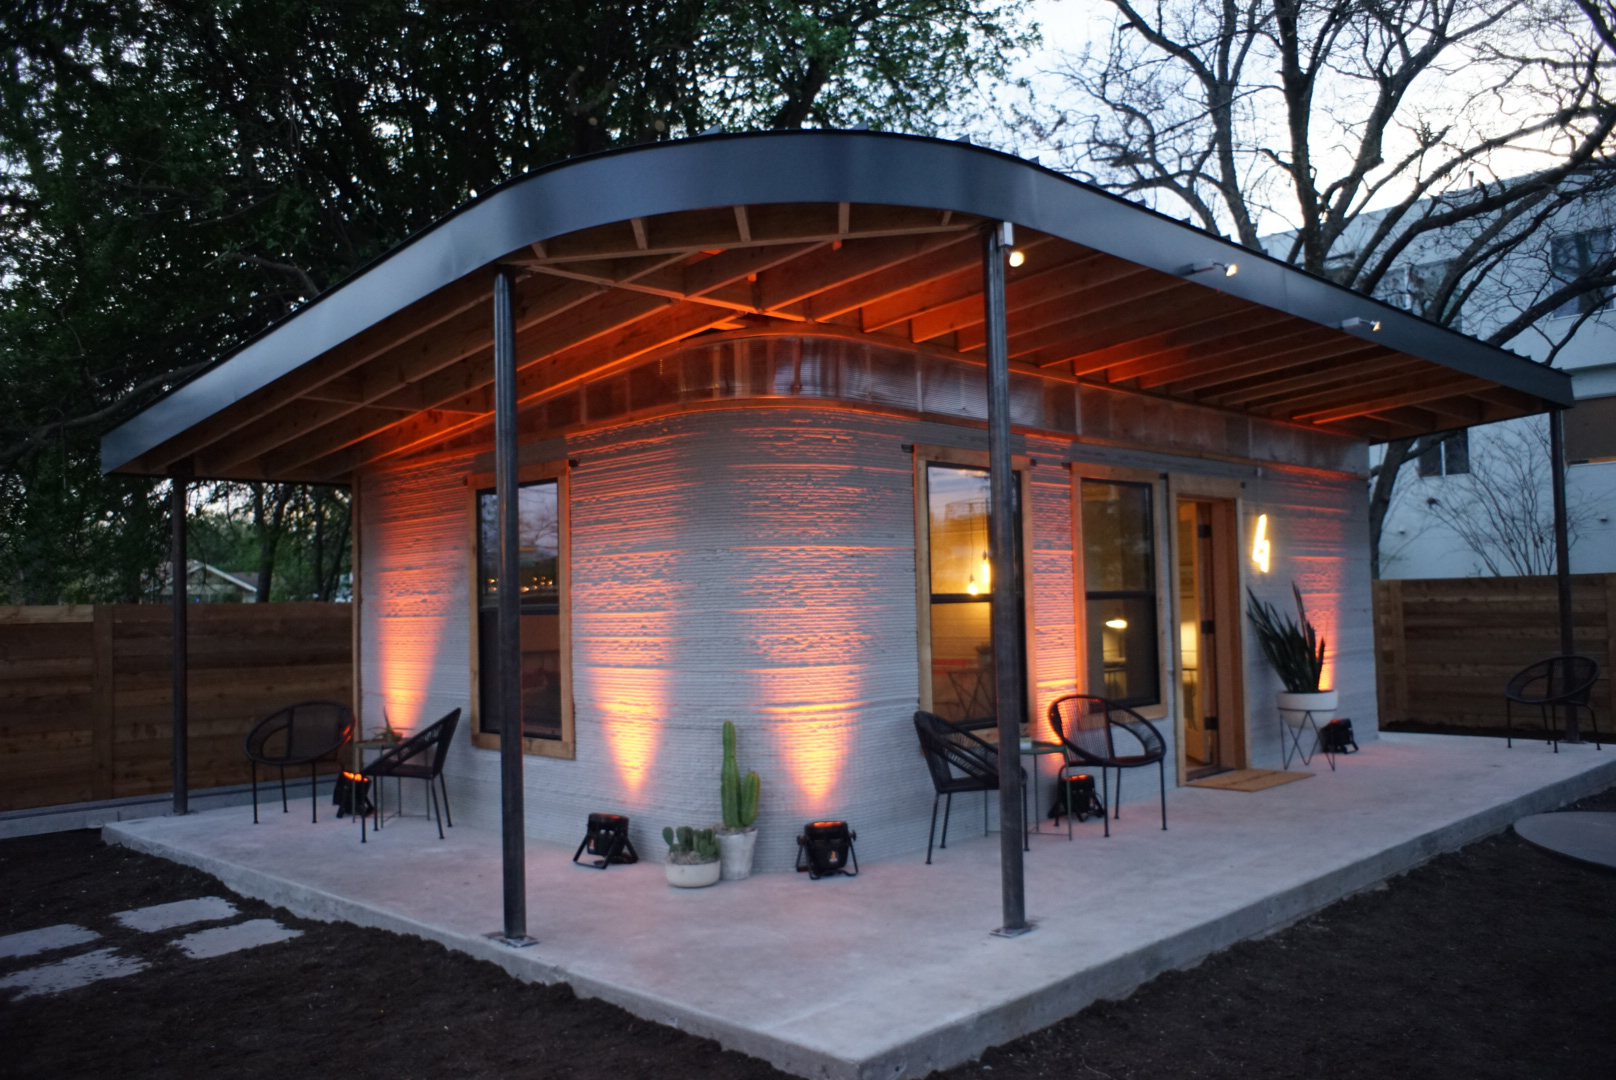 Is 3D printing houses the next wave of construction?